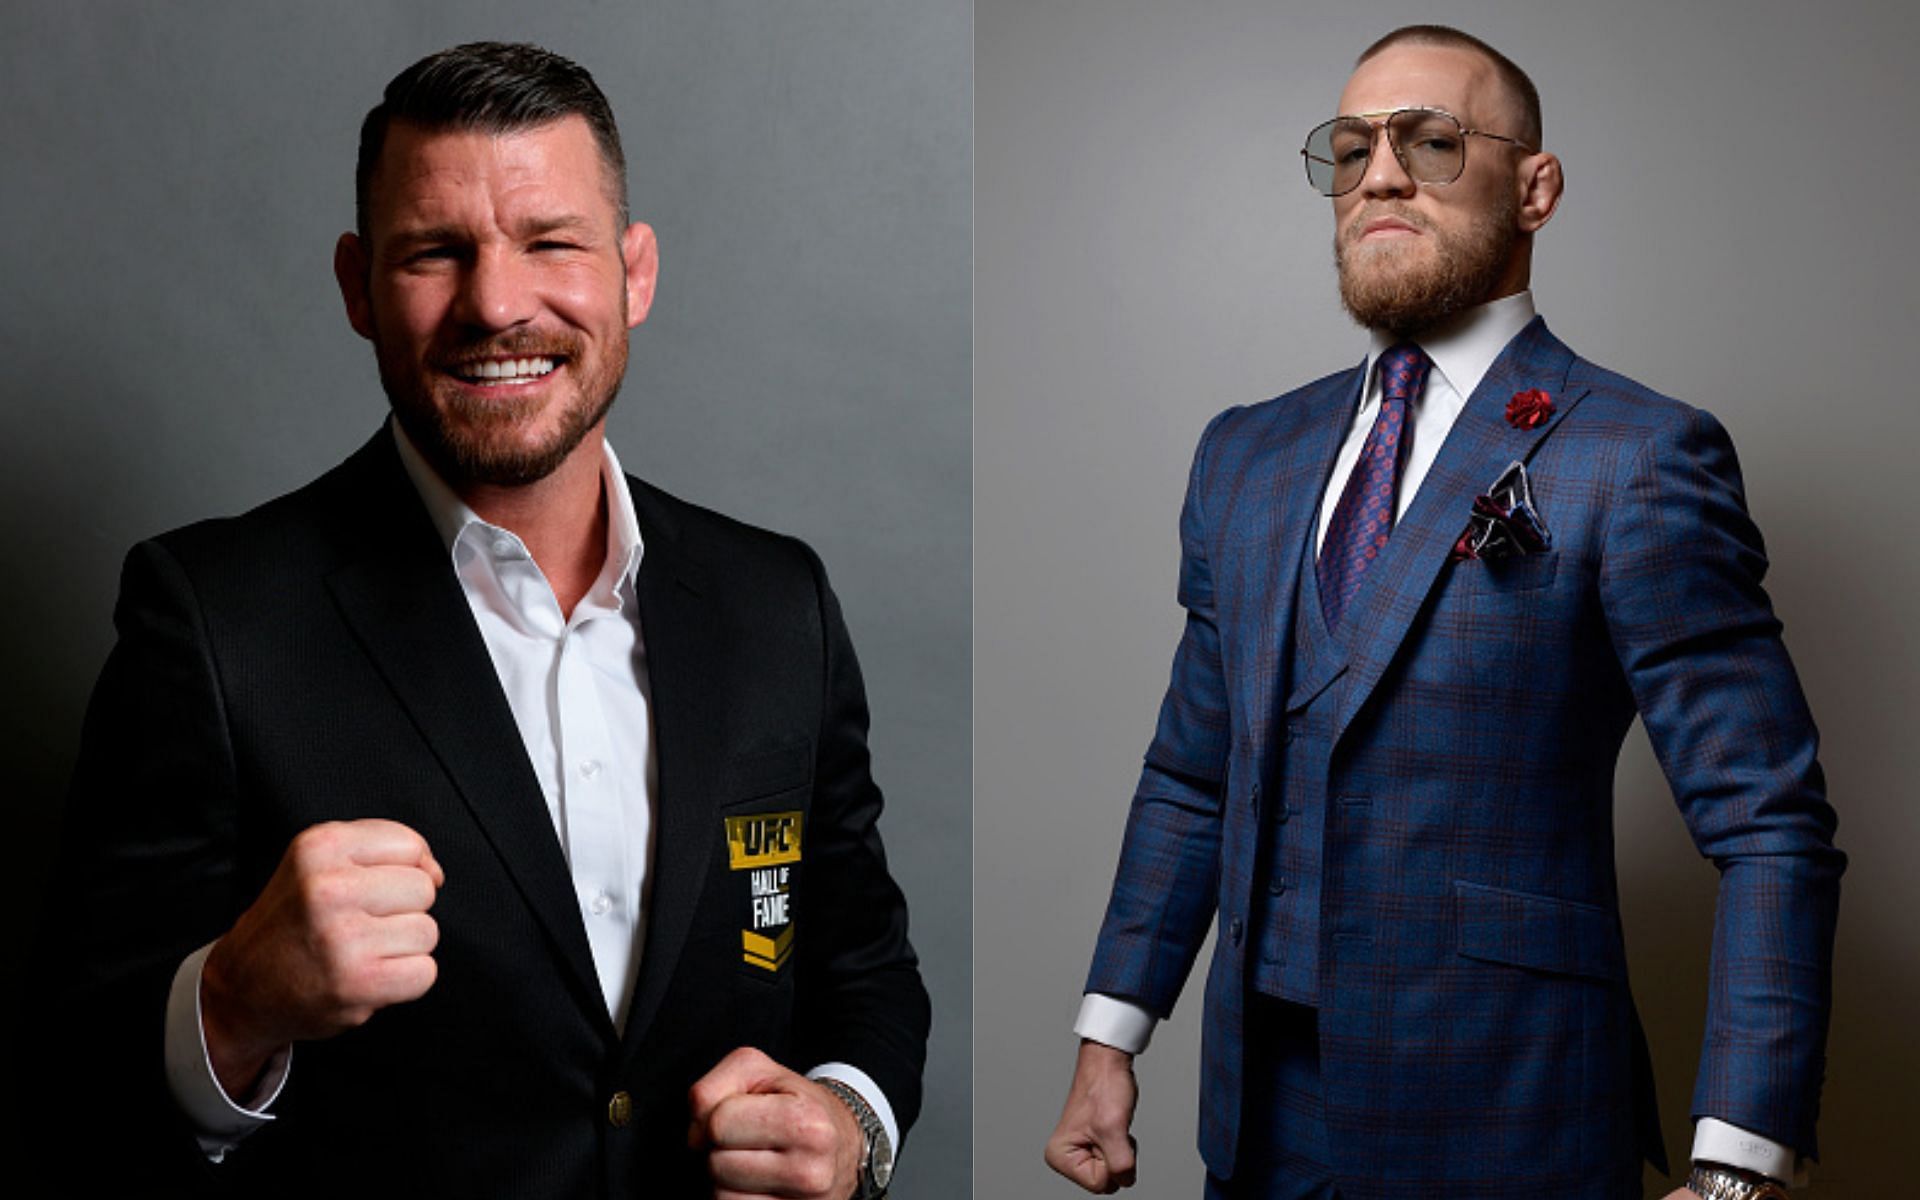 Michael Bisping (left) and Conor McGregor (right)(Images via Getty)